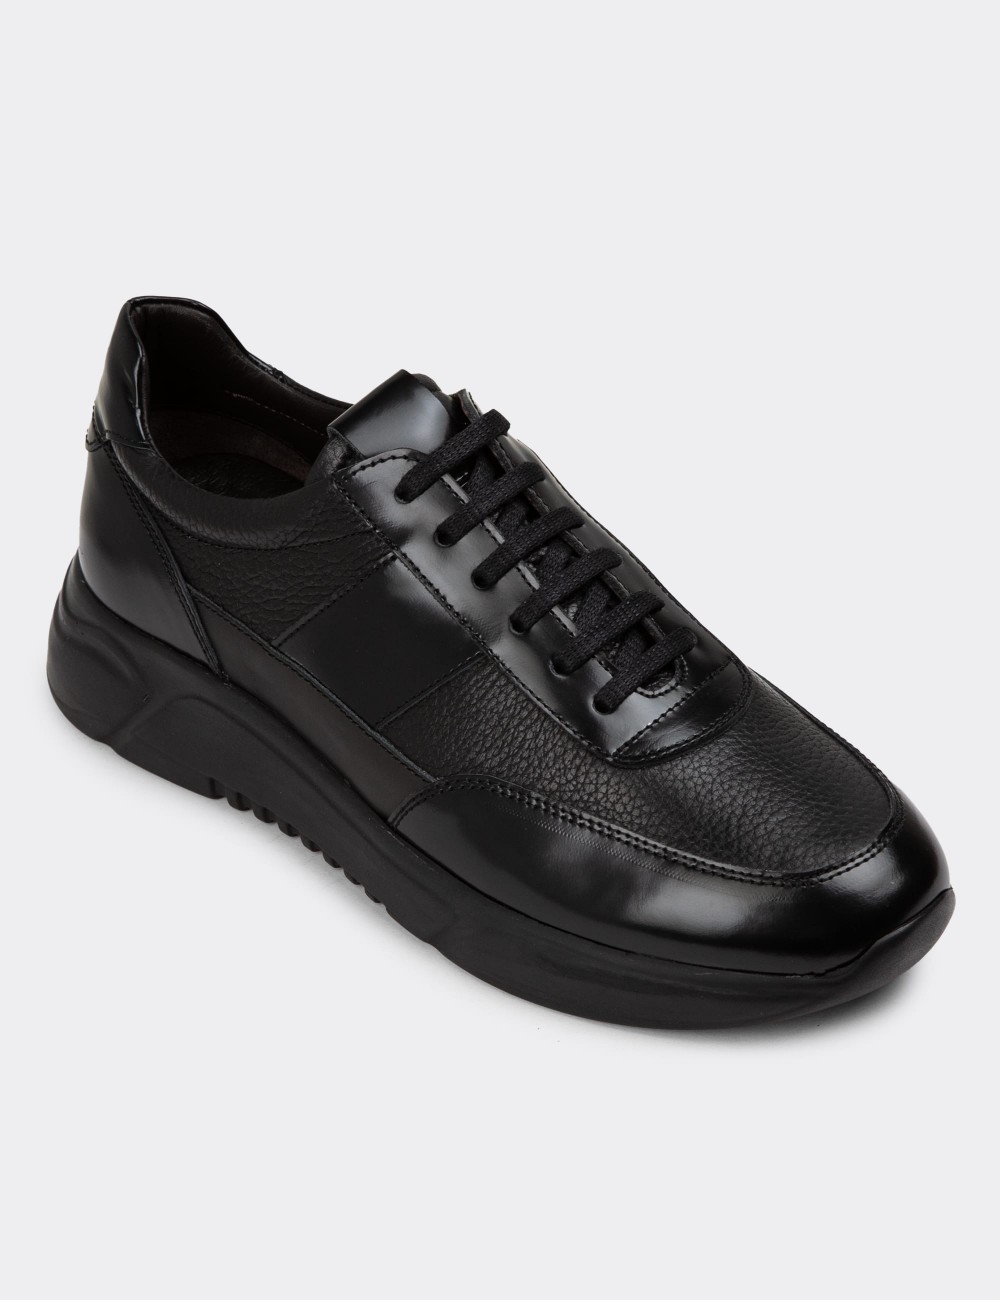 Black Leather Sneakers - 01963MSYHE01